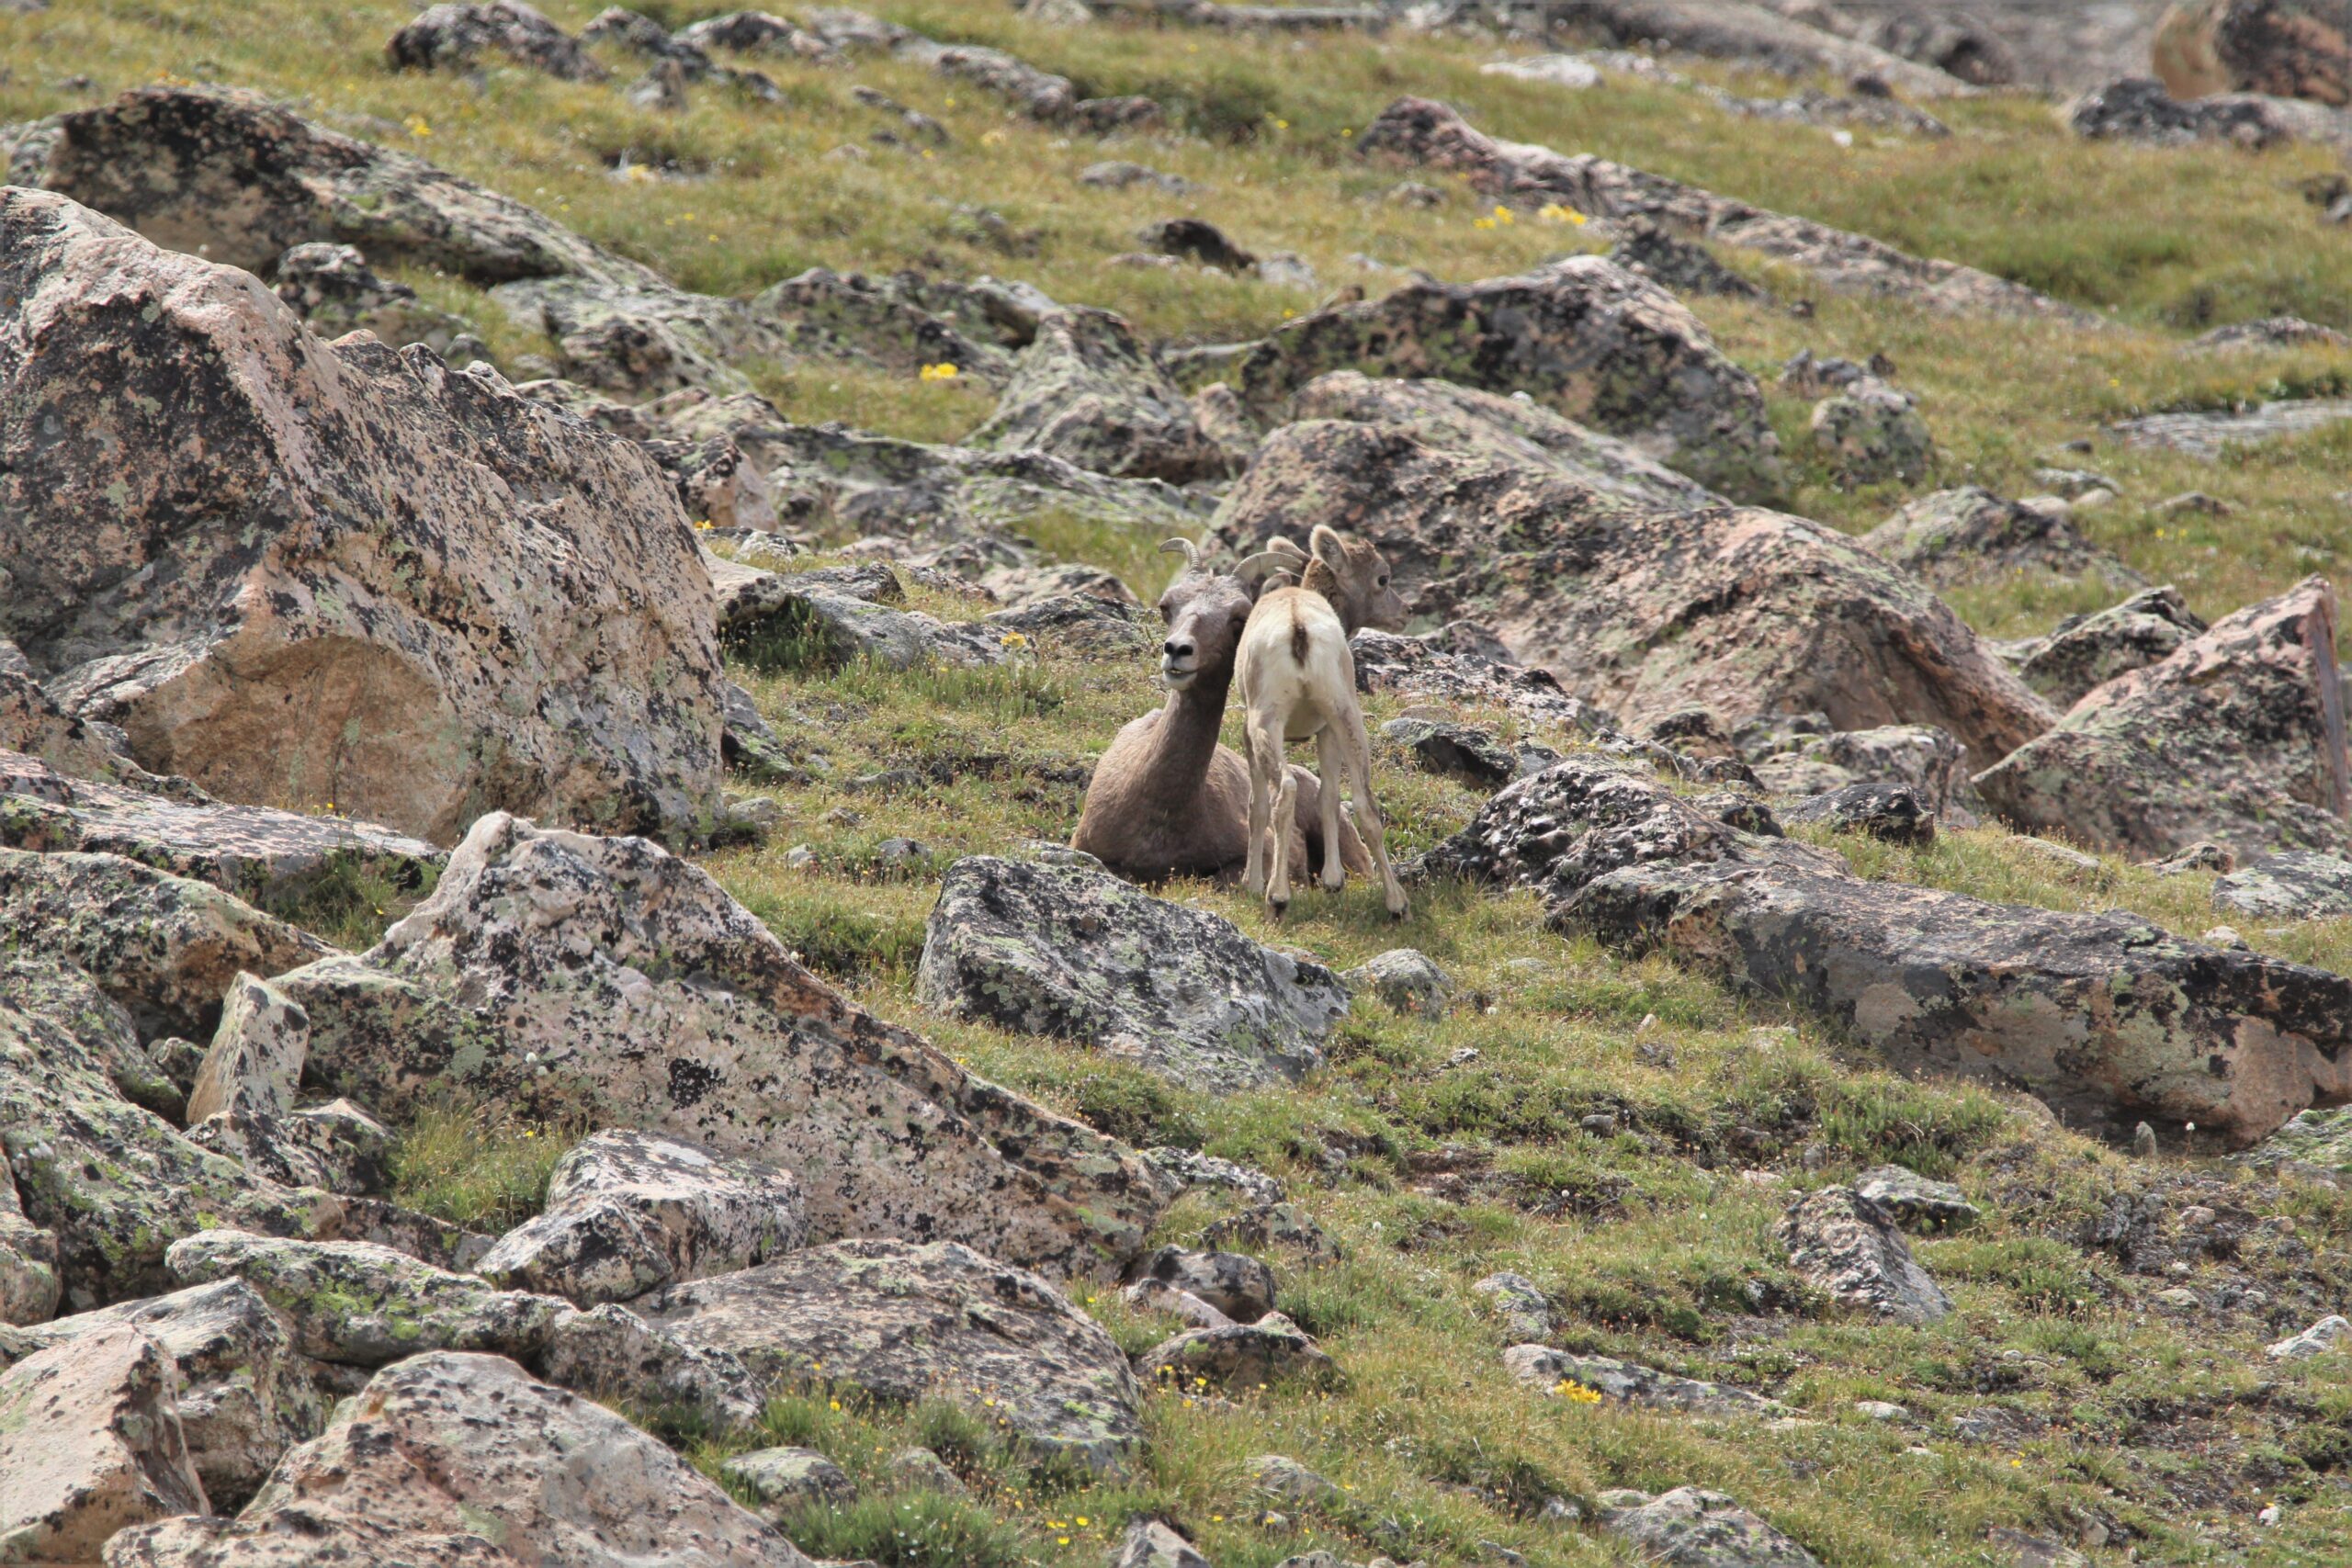 A bighorn ewe lays in a grassy spot among a rocky habitat. Her young lamb leans against her.